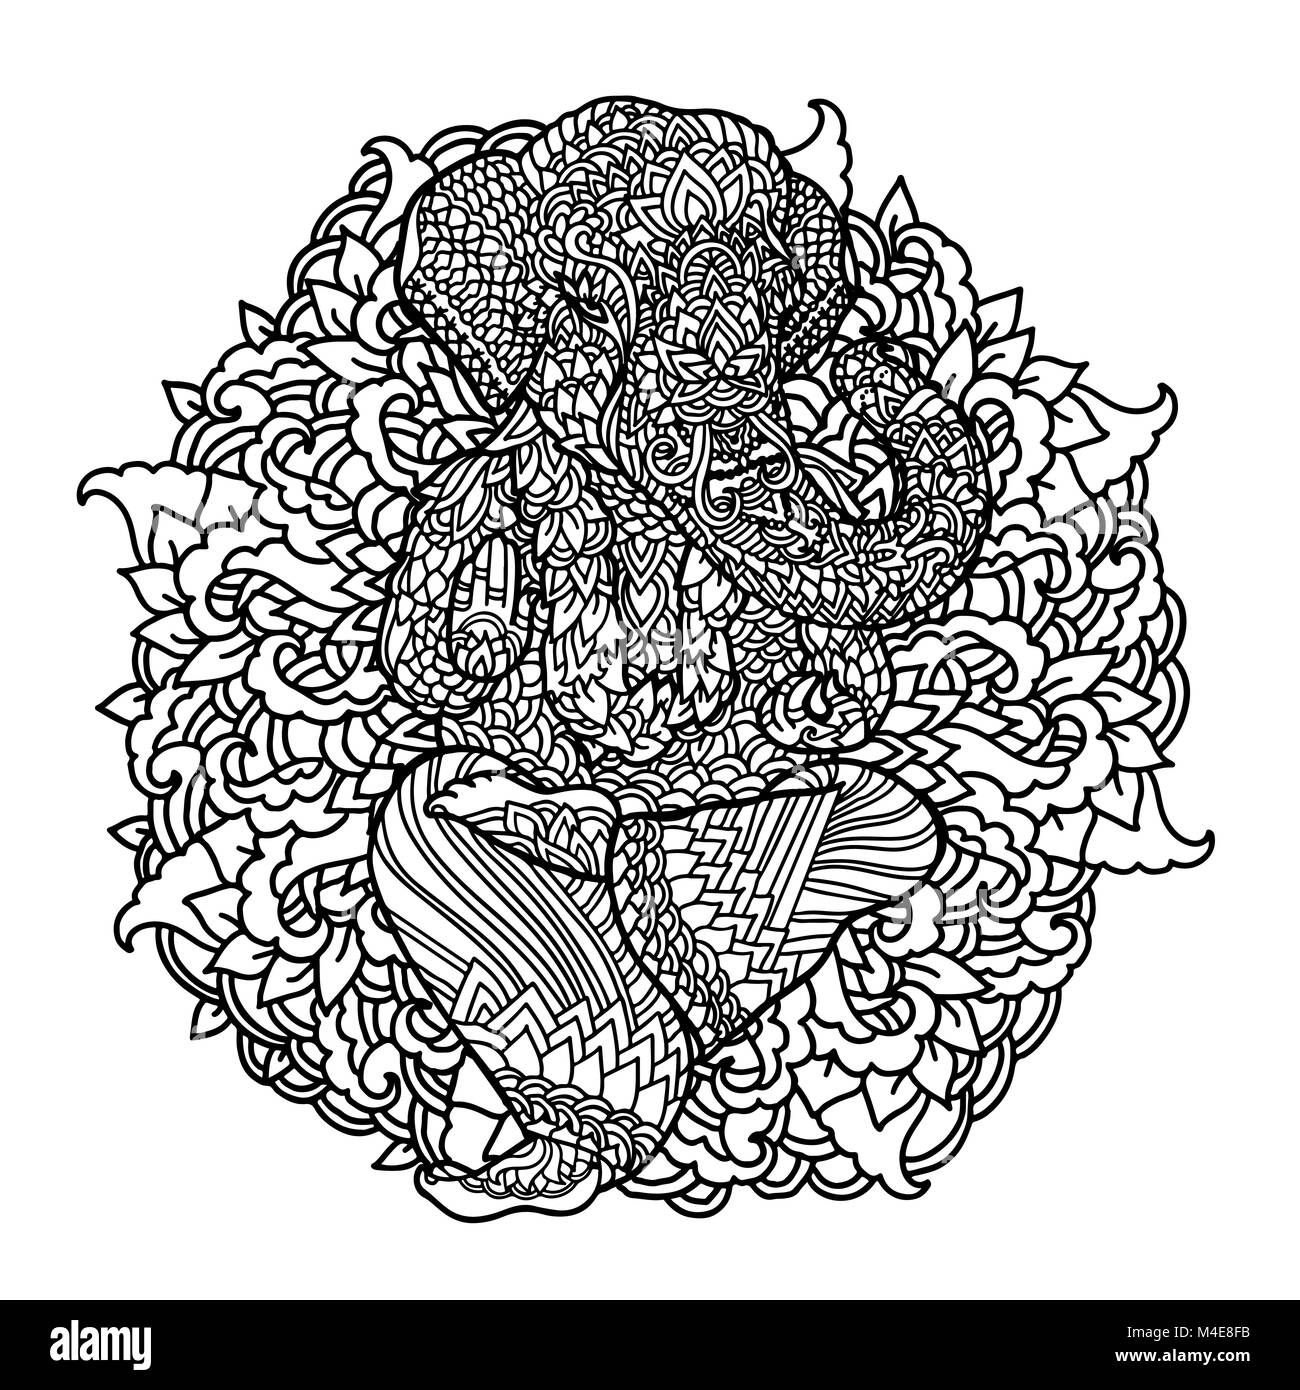 Lord Ganesha on indian mandala background. Asian pattern with leaves and flowers. Yoga style print. Black and white vector illustration. Stock Vector